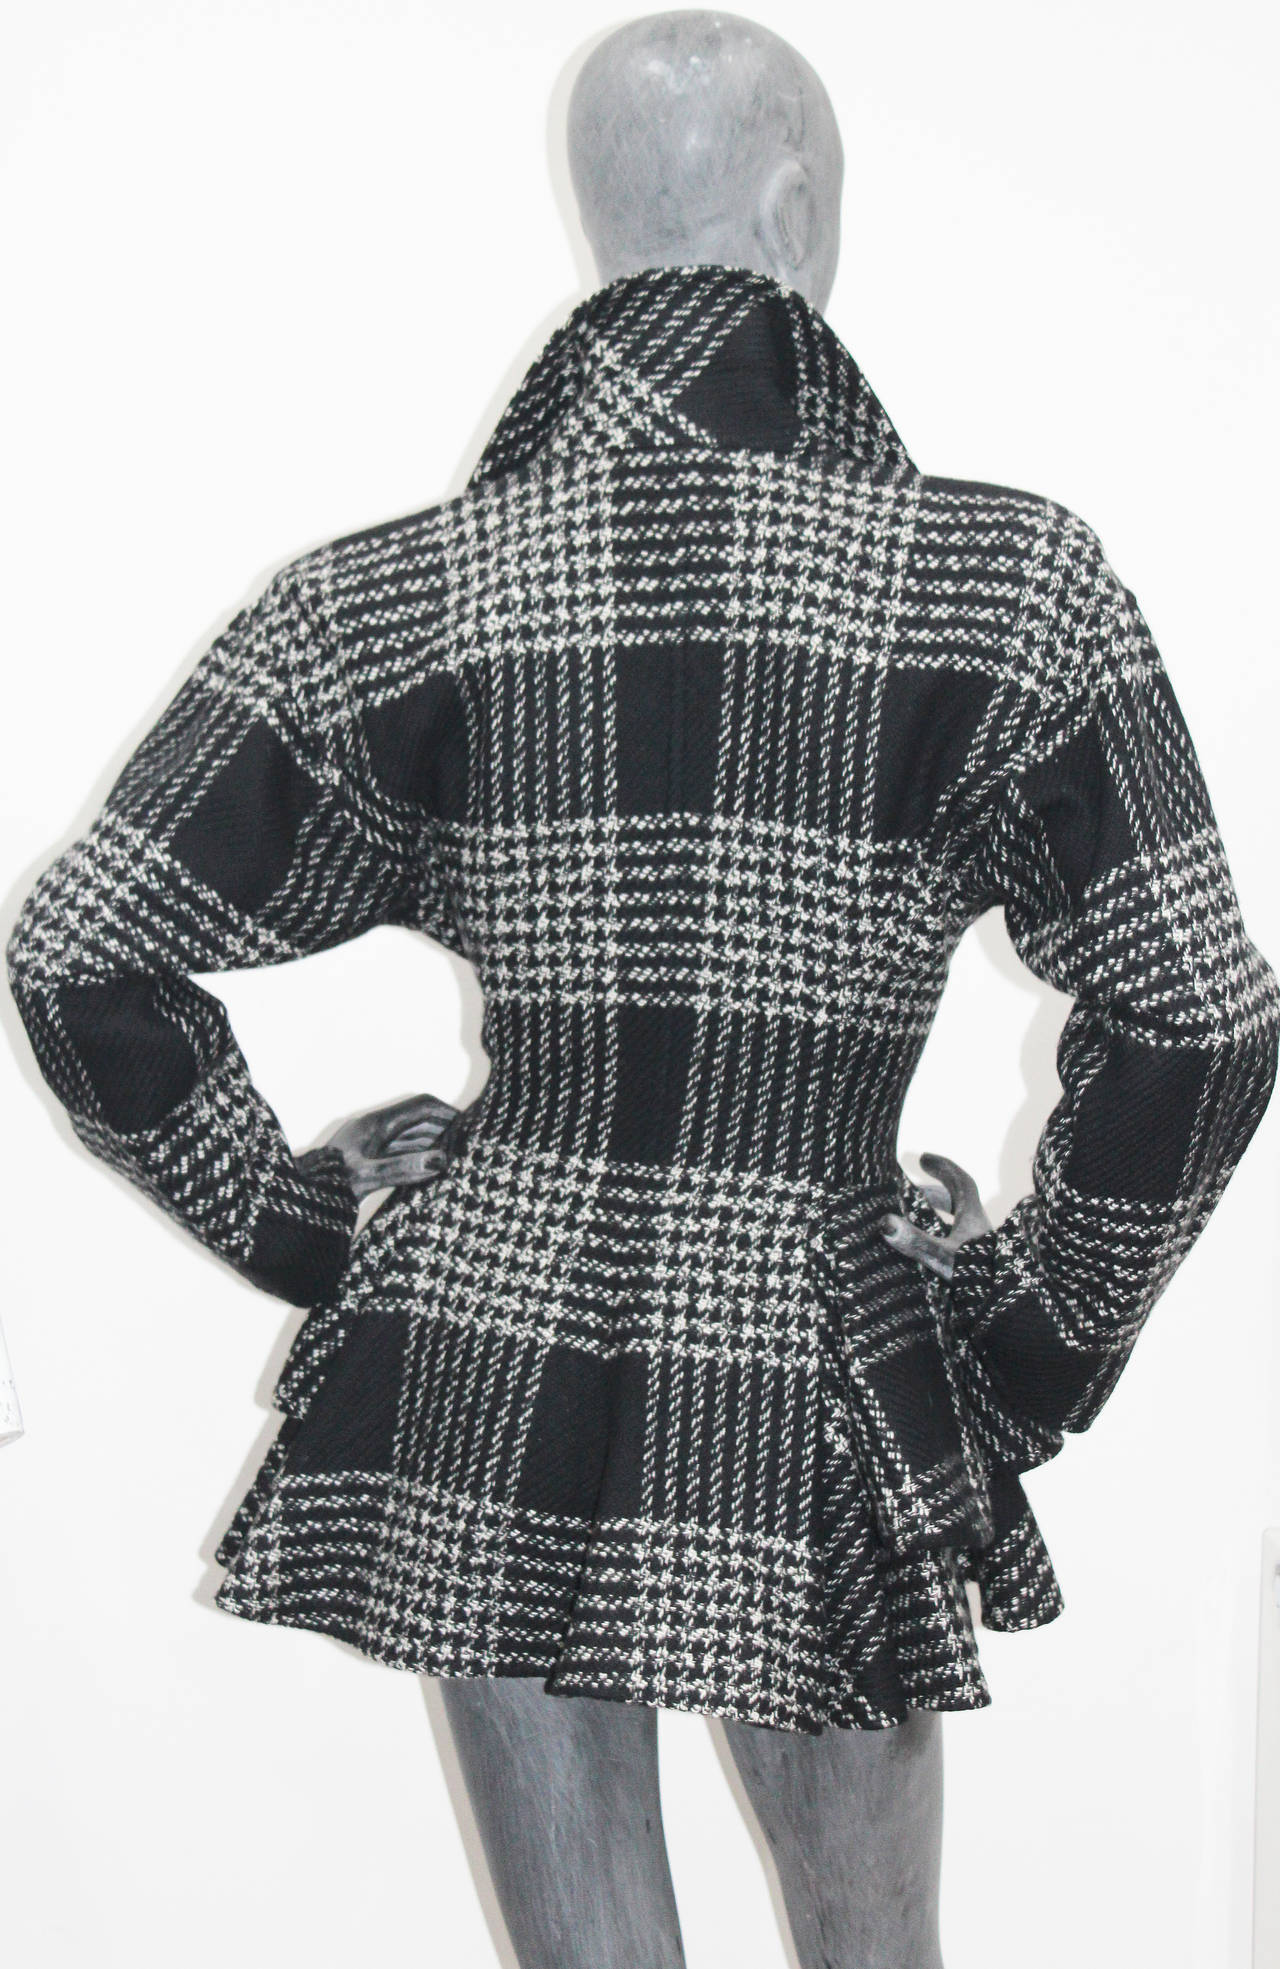 A beautiful checked tweed jacket from the 1980s with a cinched waist and peplum. 

EXCELLENT CONDITION

Fr 40 - UK 12 - US 10